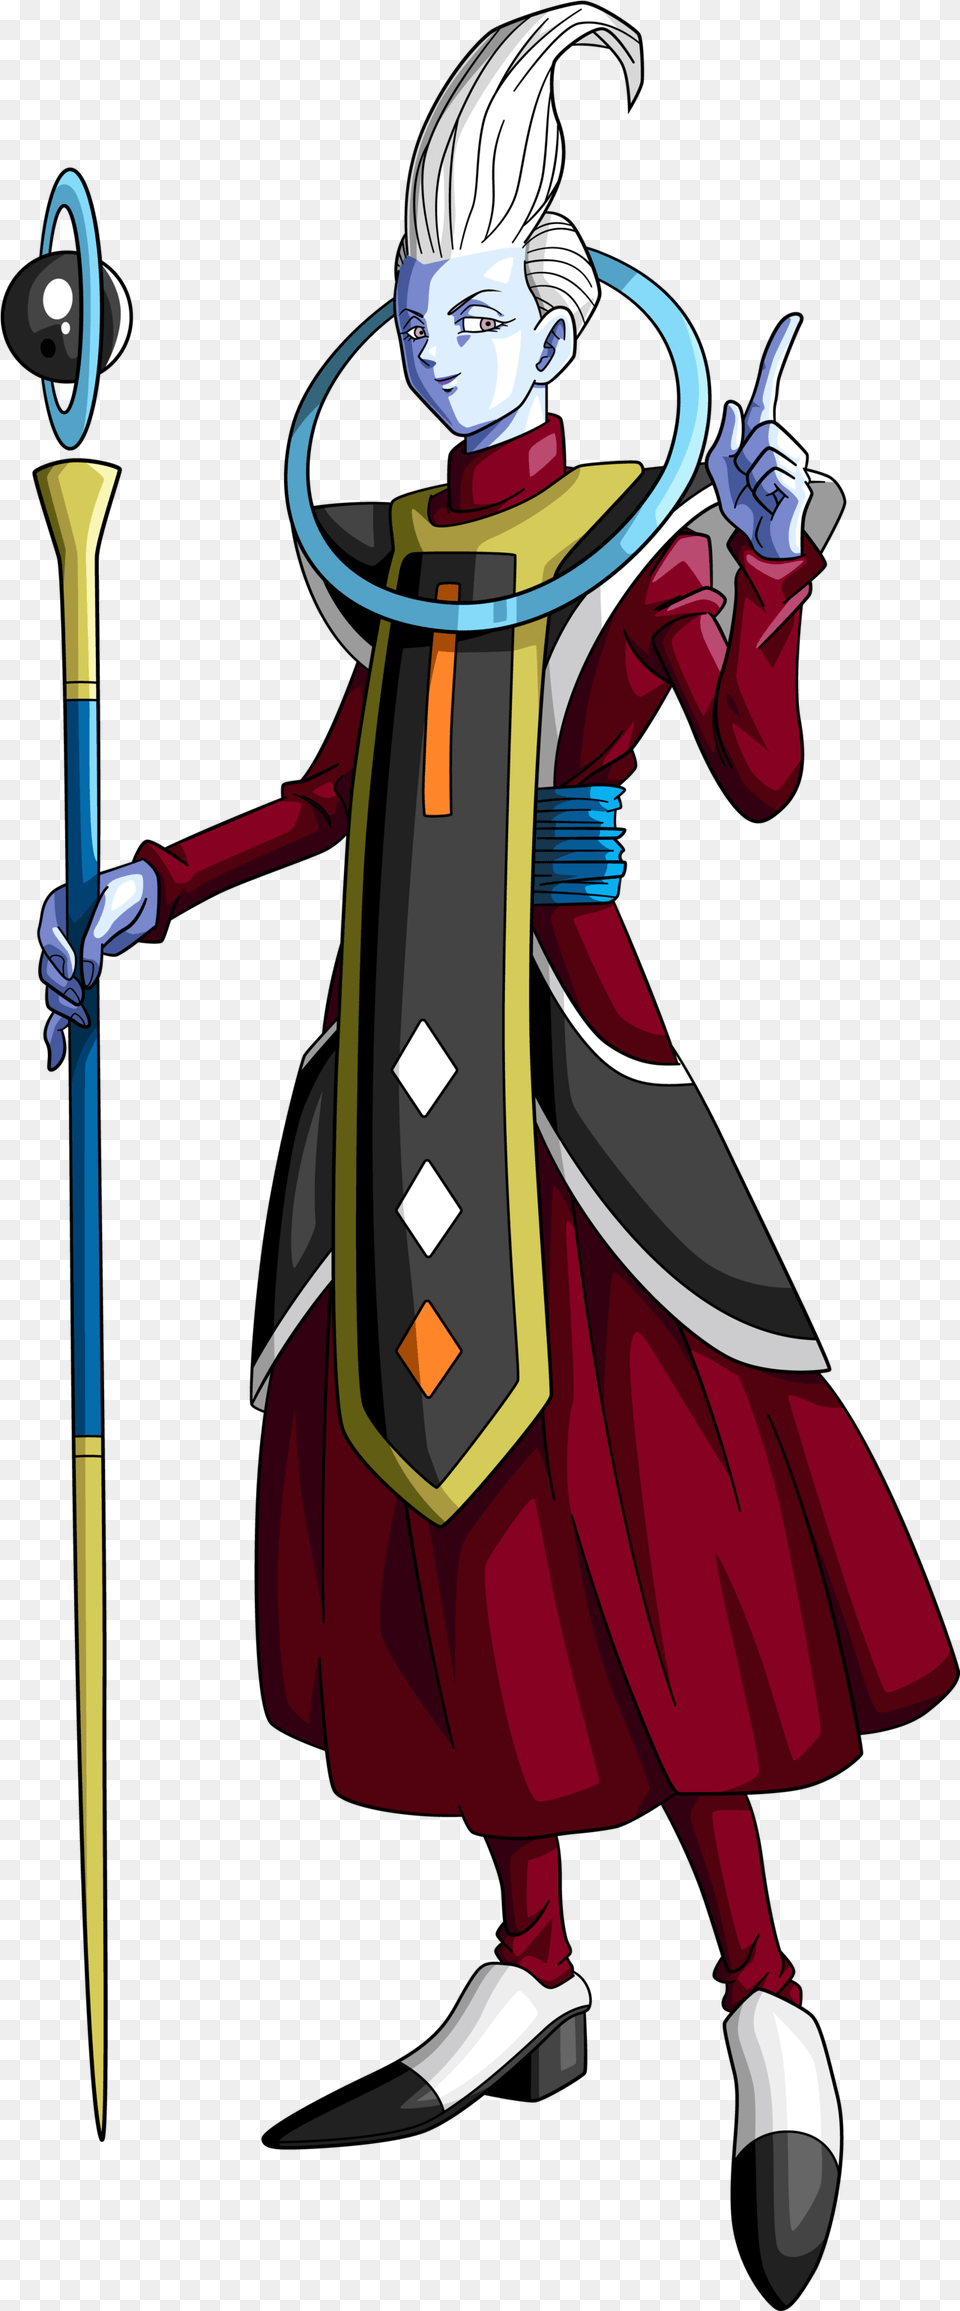 Download Whis Ultra Instinct Vegito Vs Whis Dragon Ball, Adult, Person, Female, Woman Free Transparent Png